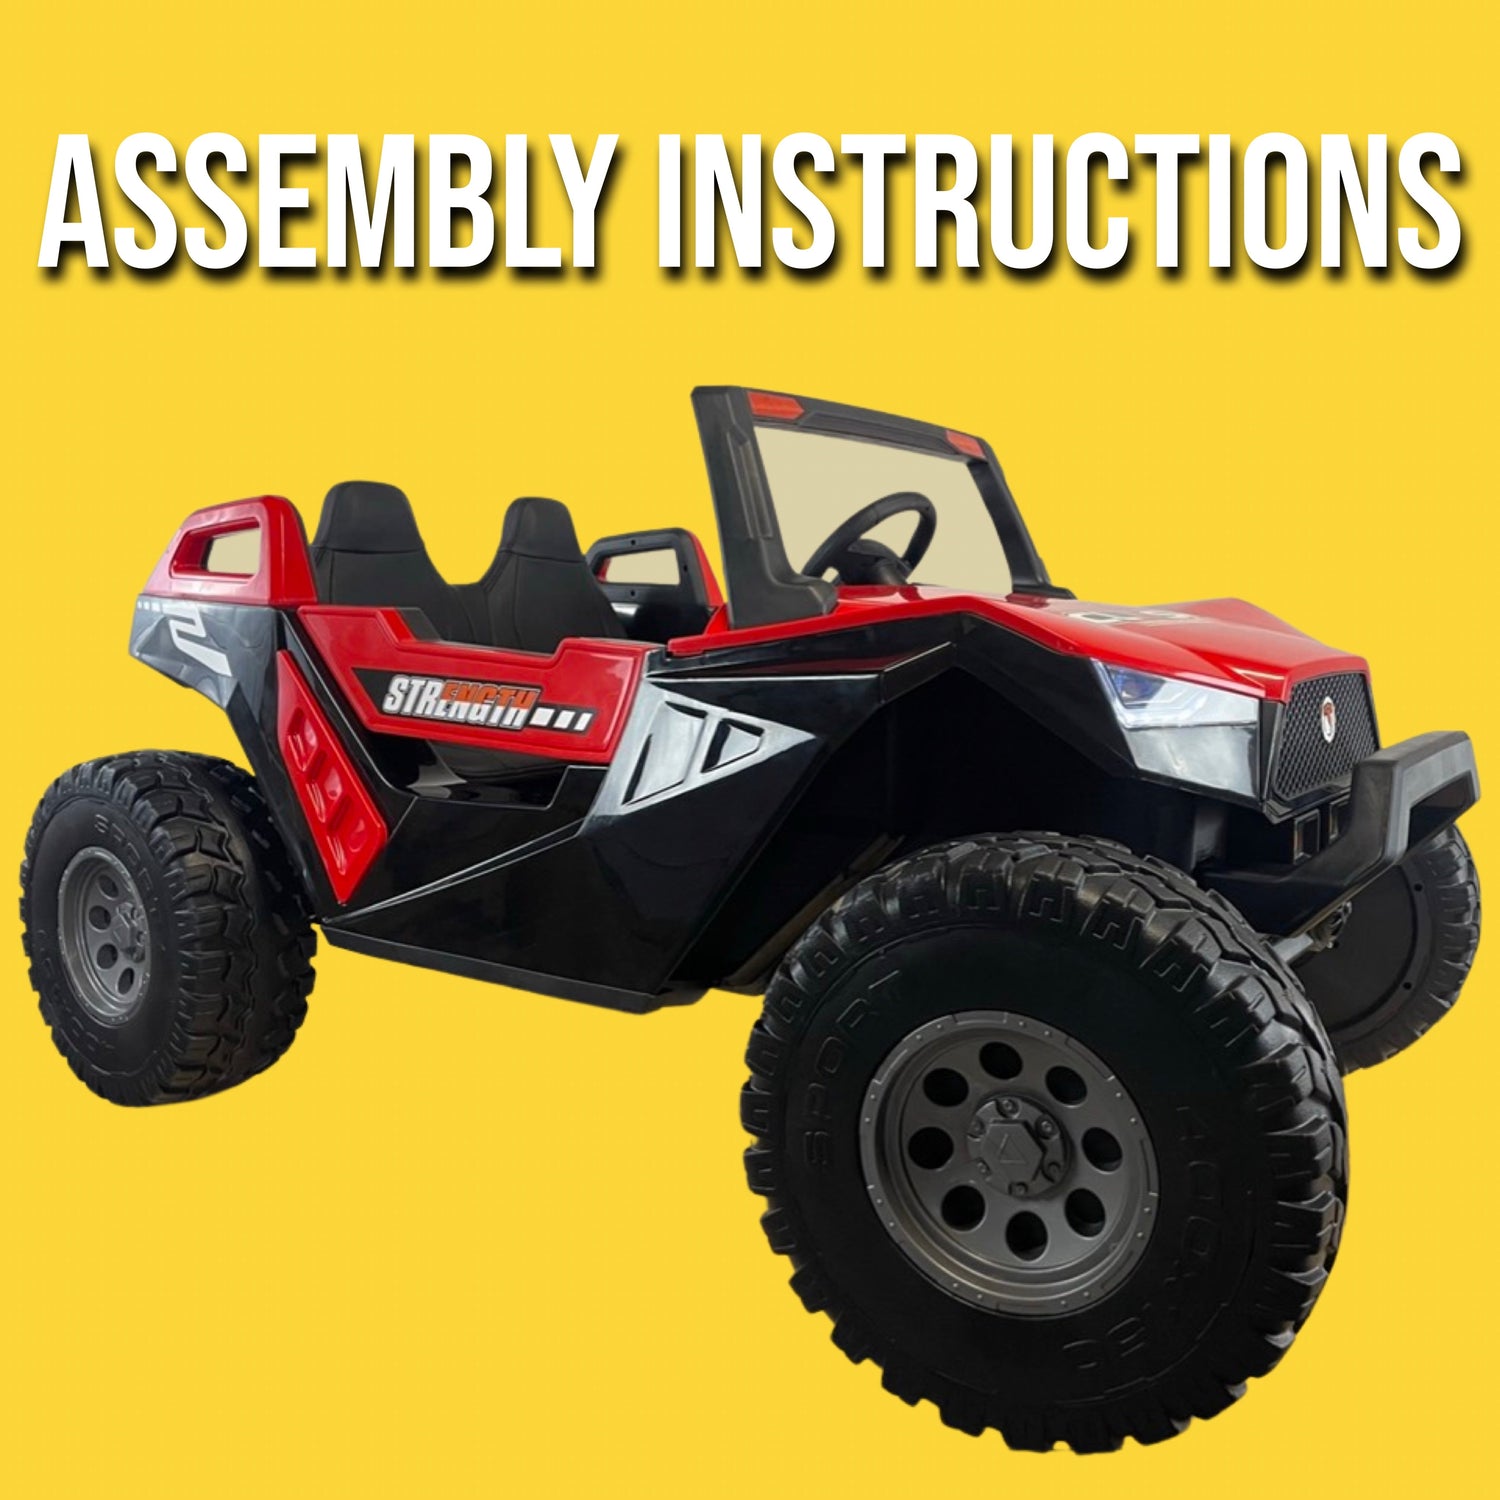 R&G Toys 24V AWD Buggy Assembly Video Instructions R&G TOYS